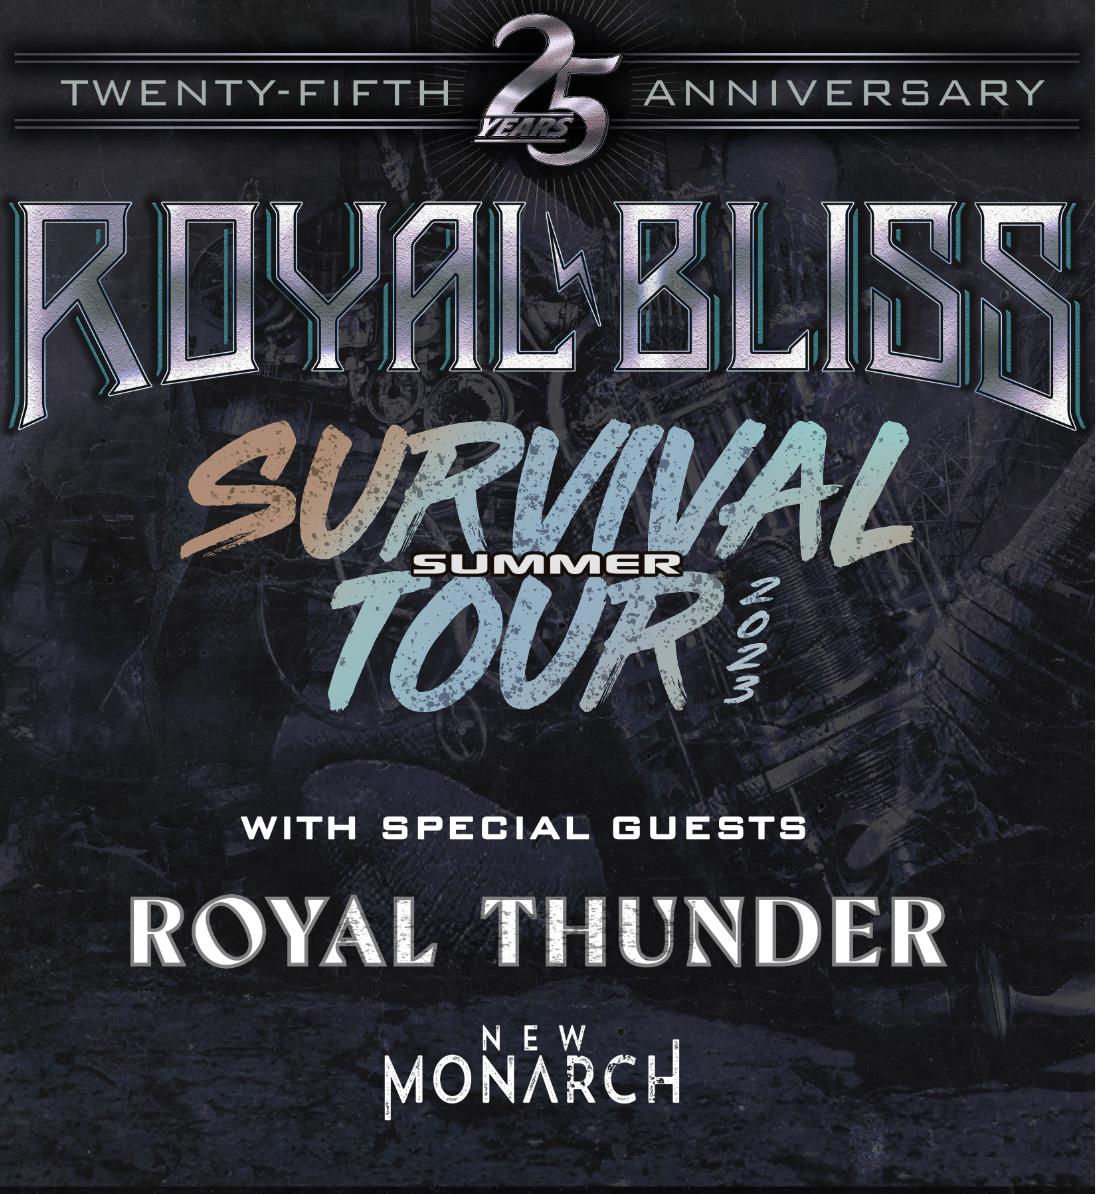 Buy Tickets to Royal Bliss w/ Royal Thunder & New Monarch in Buffalo on